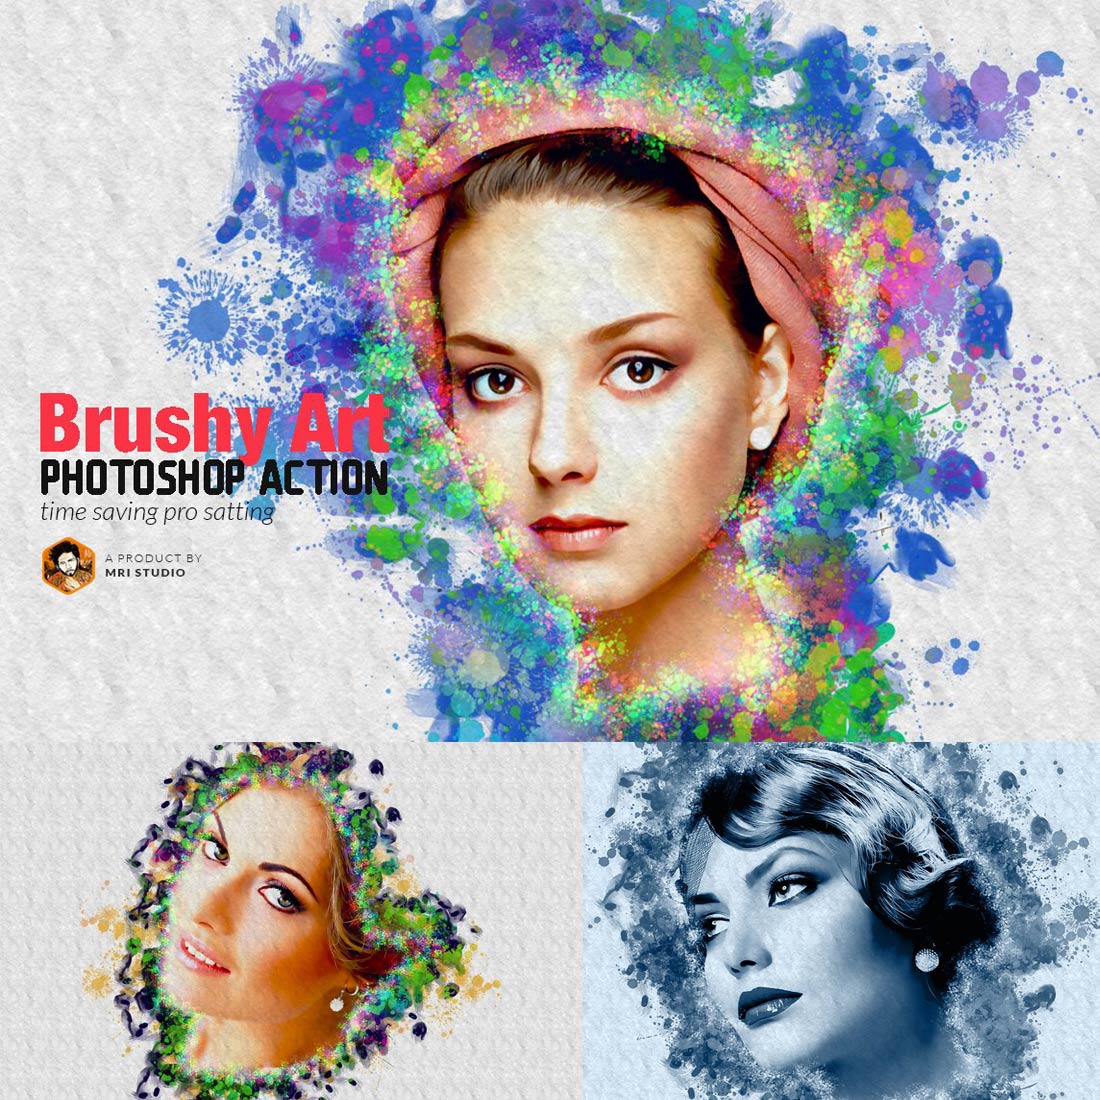 Brushy Art Action cover image.